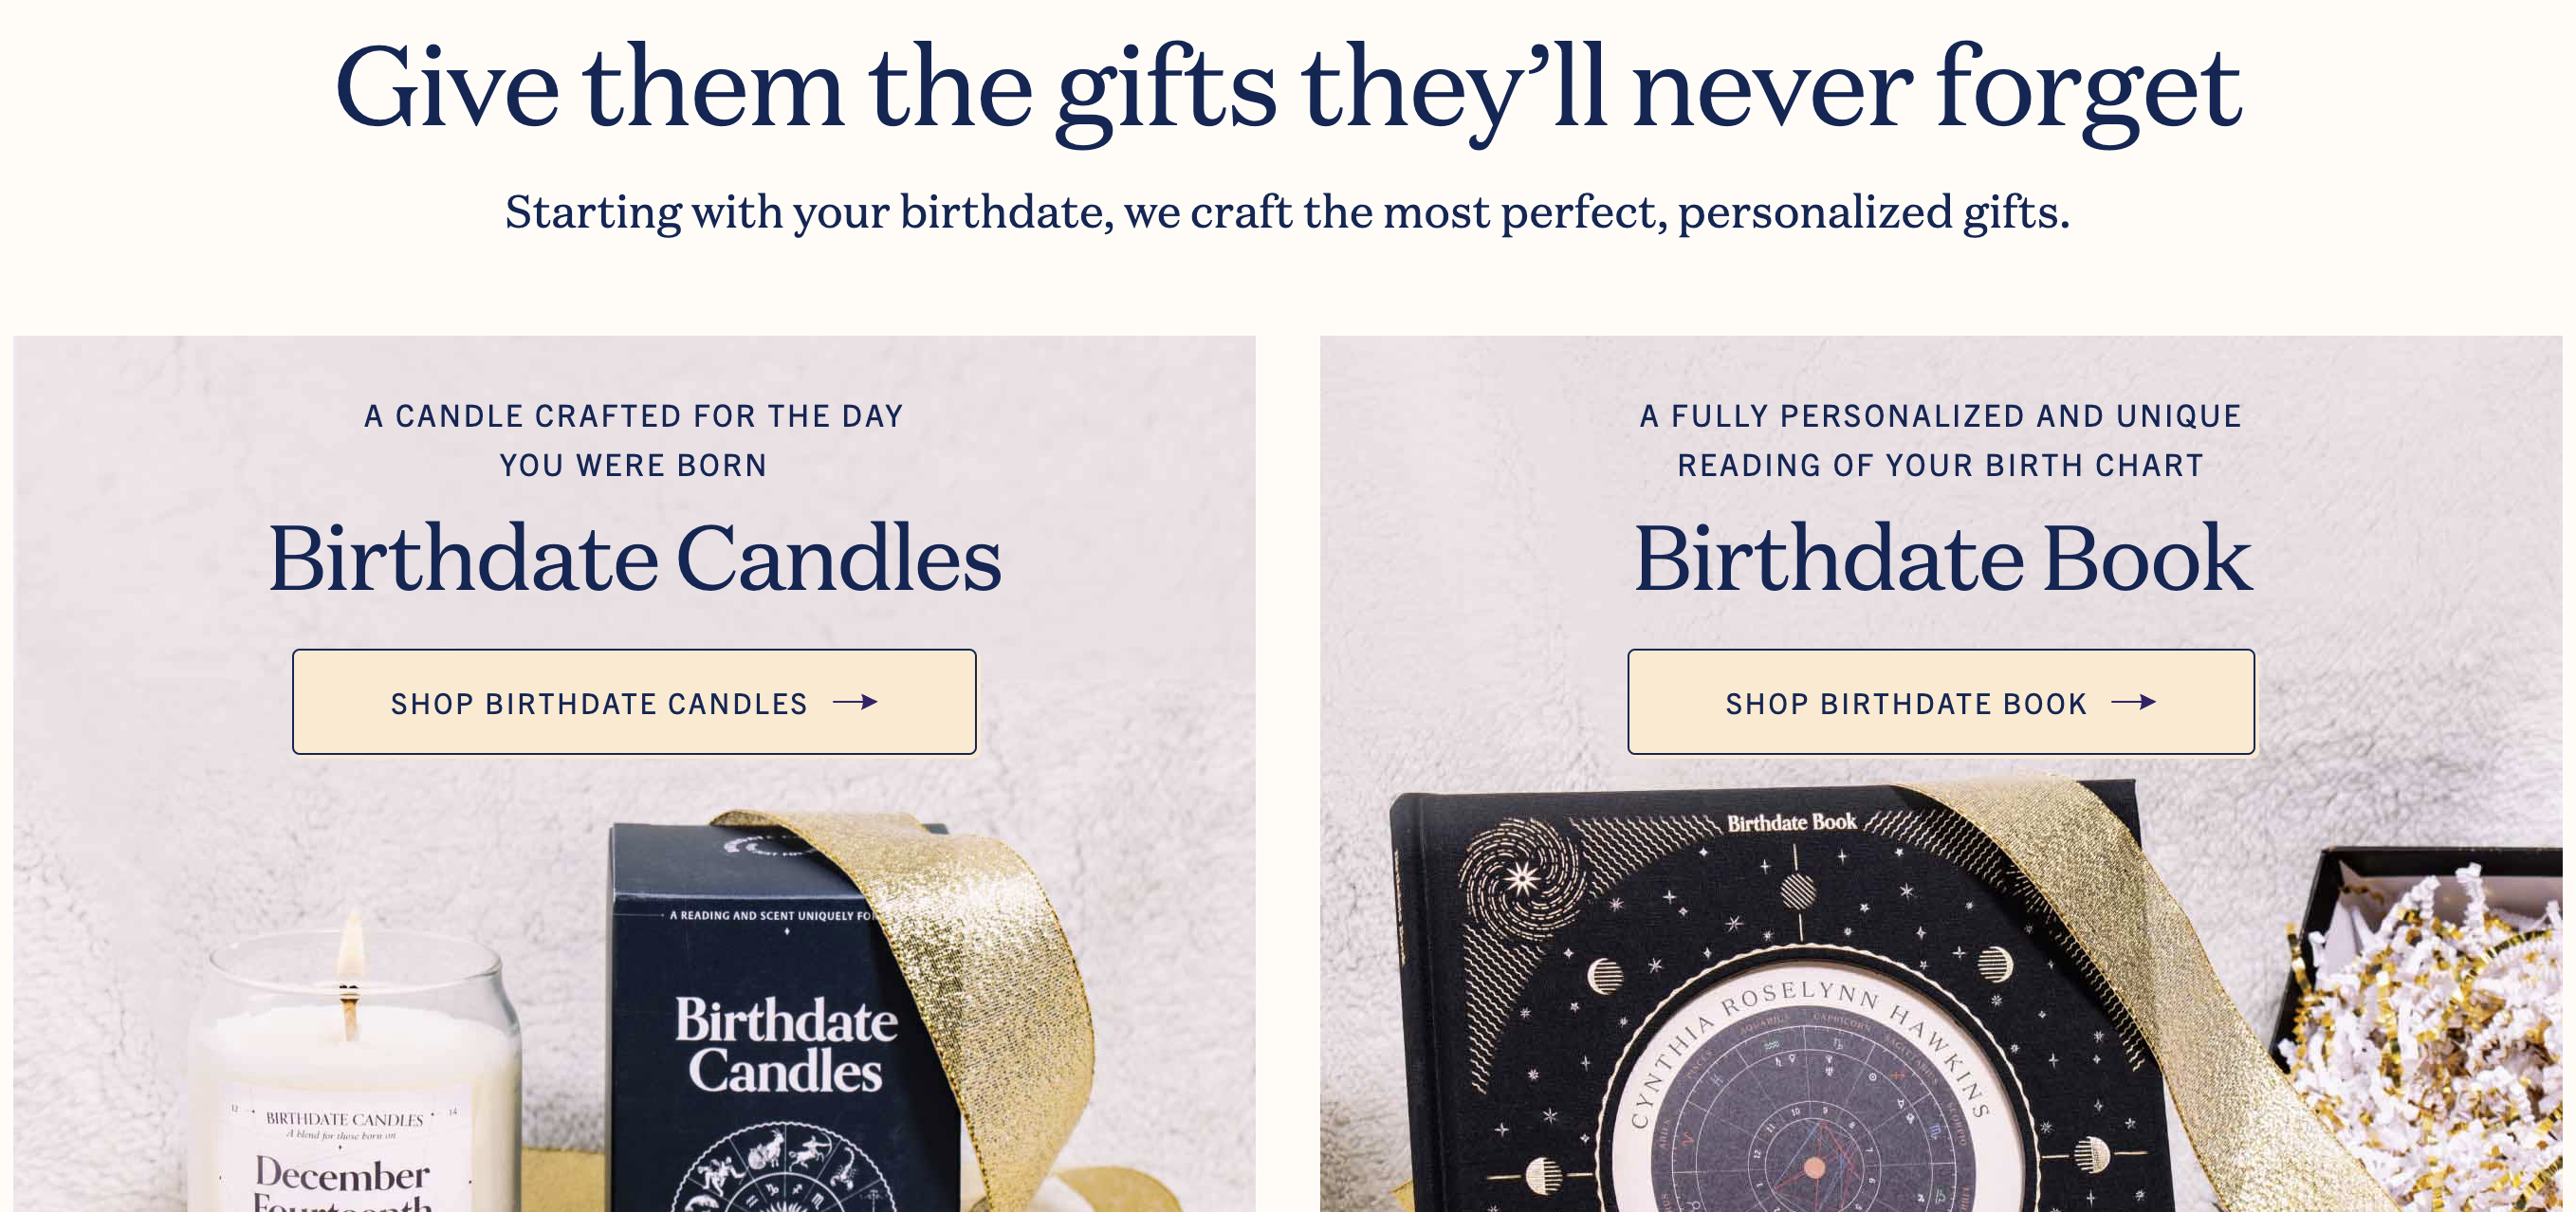 Birthdate Homepage showing two popular products, Birthdate Candles and Birthdate Book